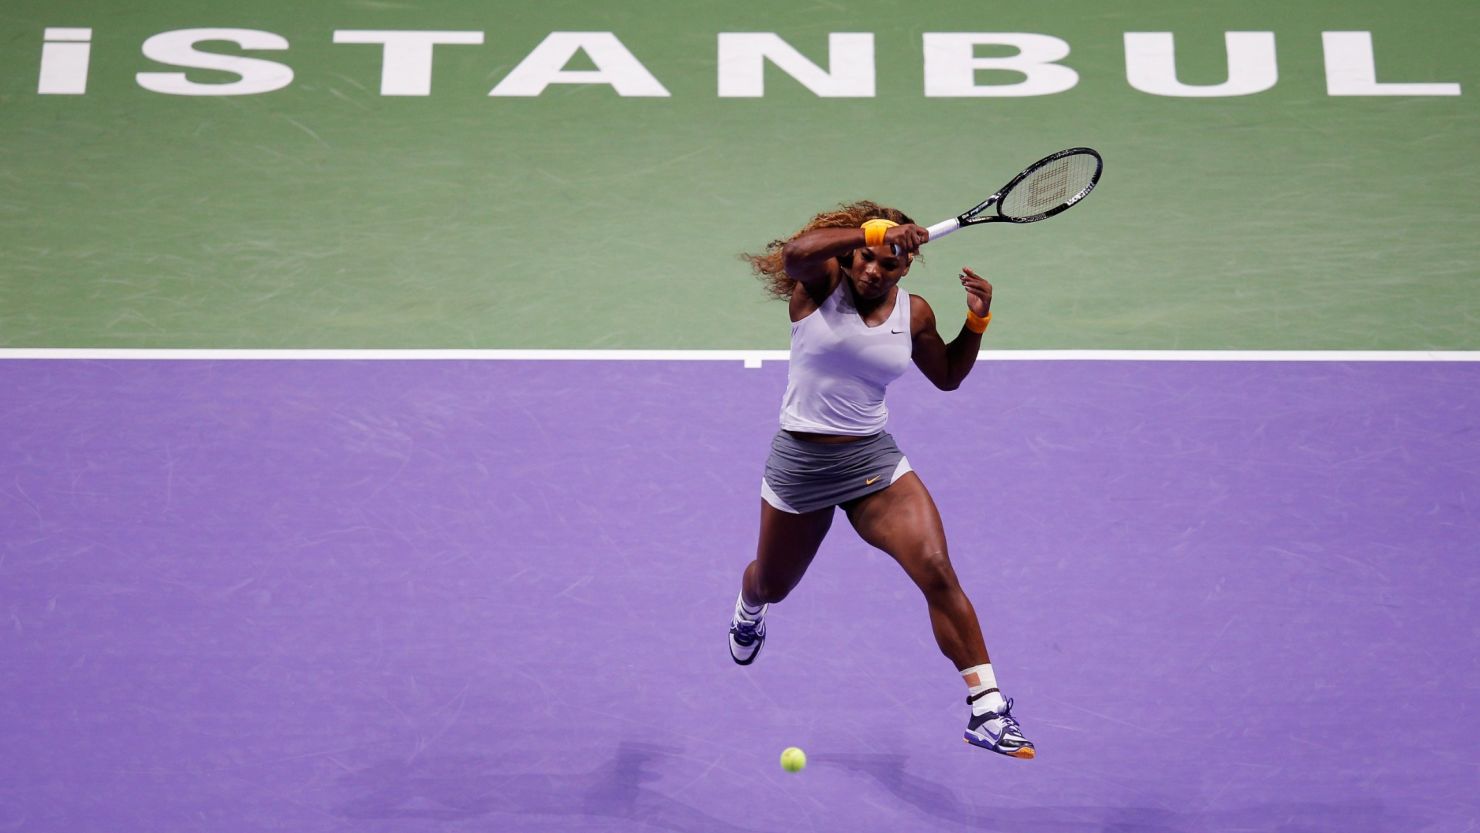 Serena Williams blasts a forehand winner during a straight sets win over Angelique Kerber at the Sinan Erdem Dome.  